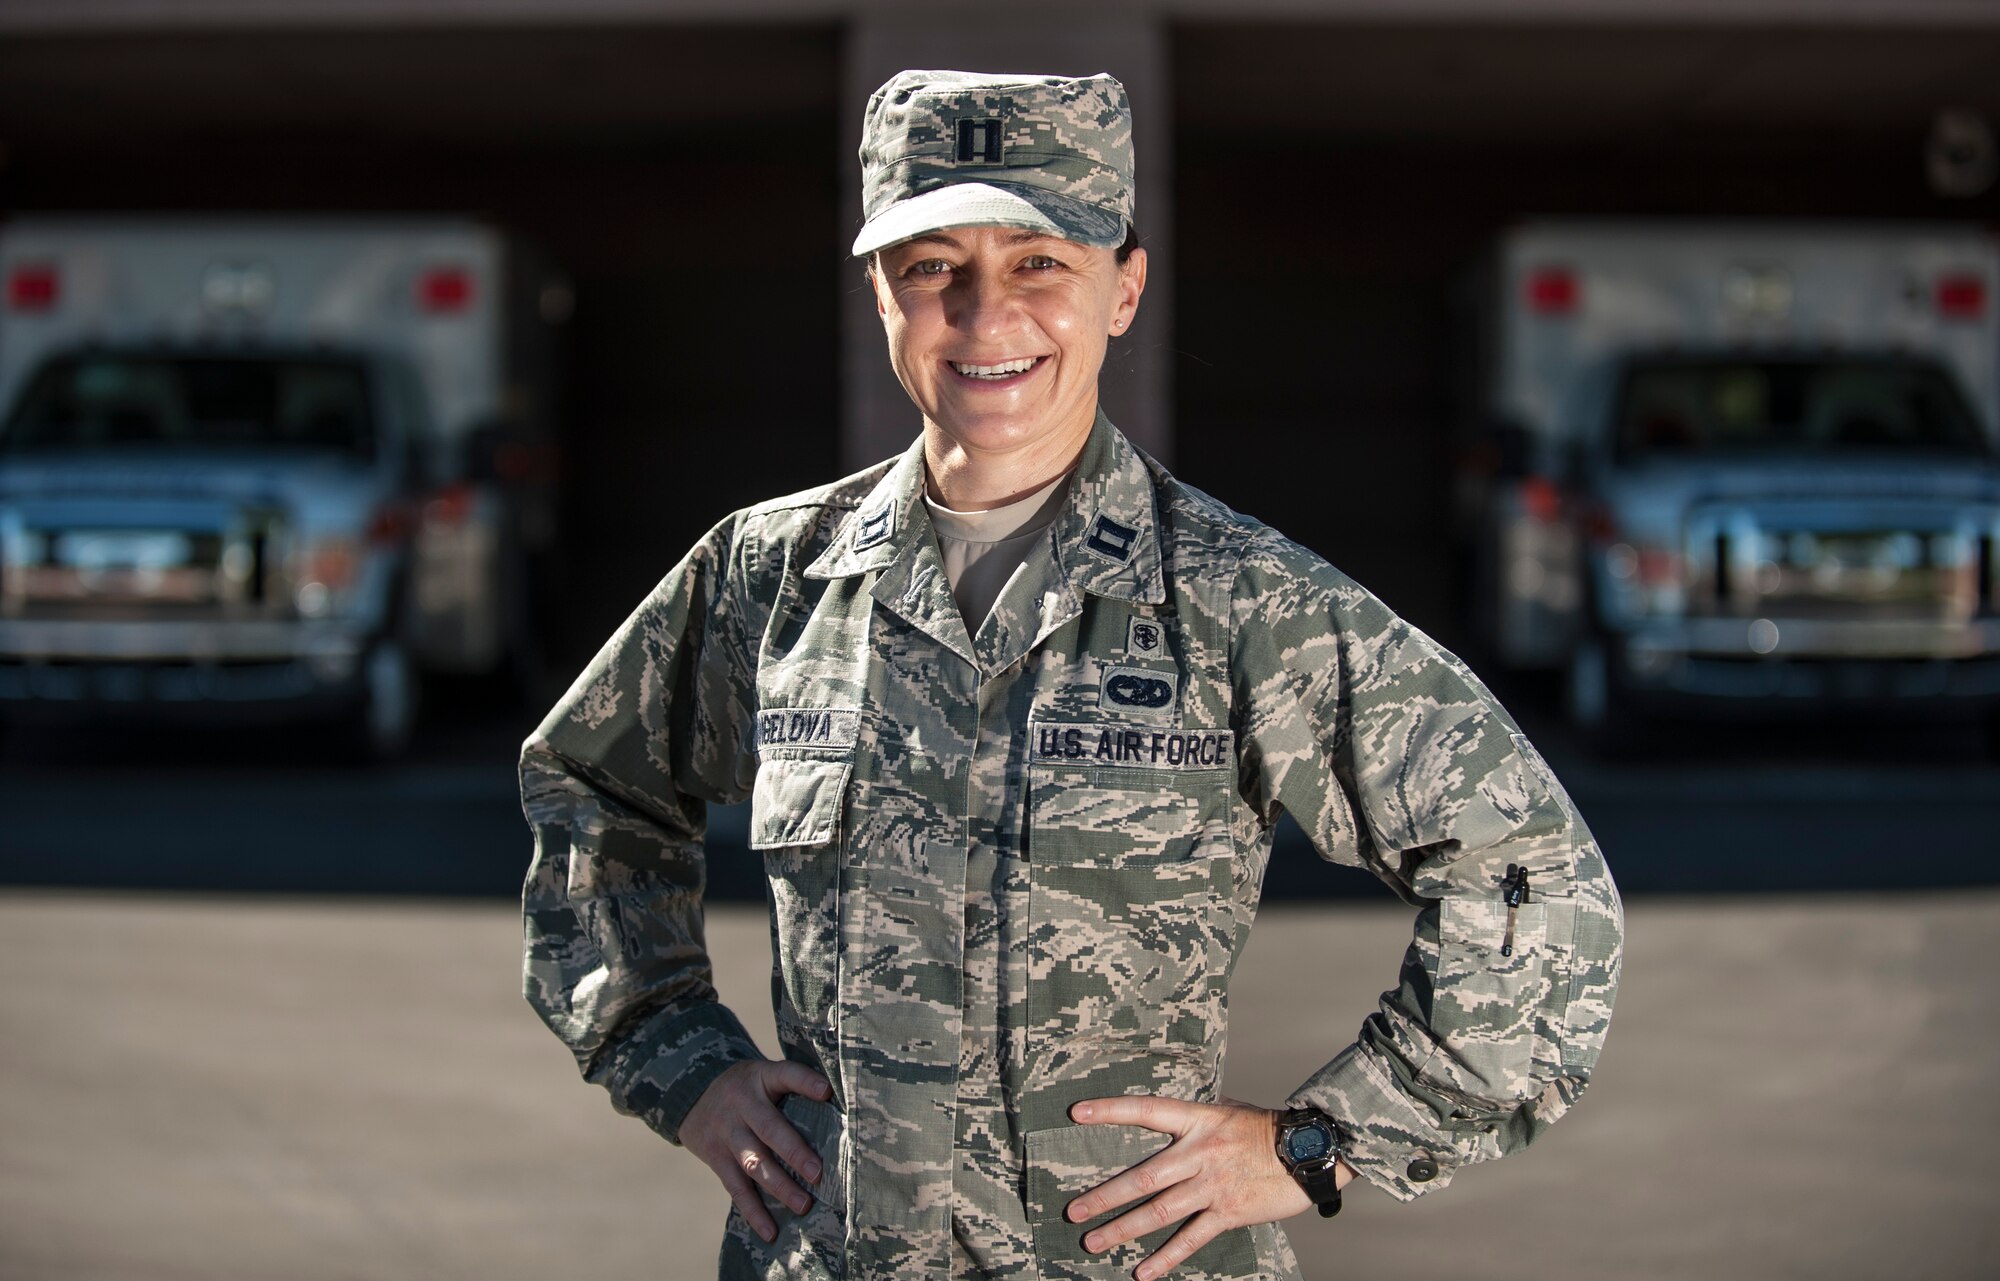 Capt. Reni Angelova, 99th Medical Group practice manager, poses for a picture outside of the Mike O’Callaghan Federal Medical Center on Nellis Air Force Base, Nev., Oct. 7, 2015. Angelova speaks Russian, Bulgarian and English while possessing master’s degrees in economics, law, business administration as well as international relations. She has worked as a teacher and a border patrol agent at one of the busiest checkpoints in Bulgaria before immigrating to the United States. She recently served in the Office of Defense Coordination in Bulgaria as an interpreter under the Language Enabled Airman Program. (U.S. Air Force photo by Staff Sgt. Siuta B. Ika)